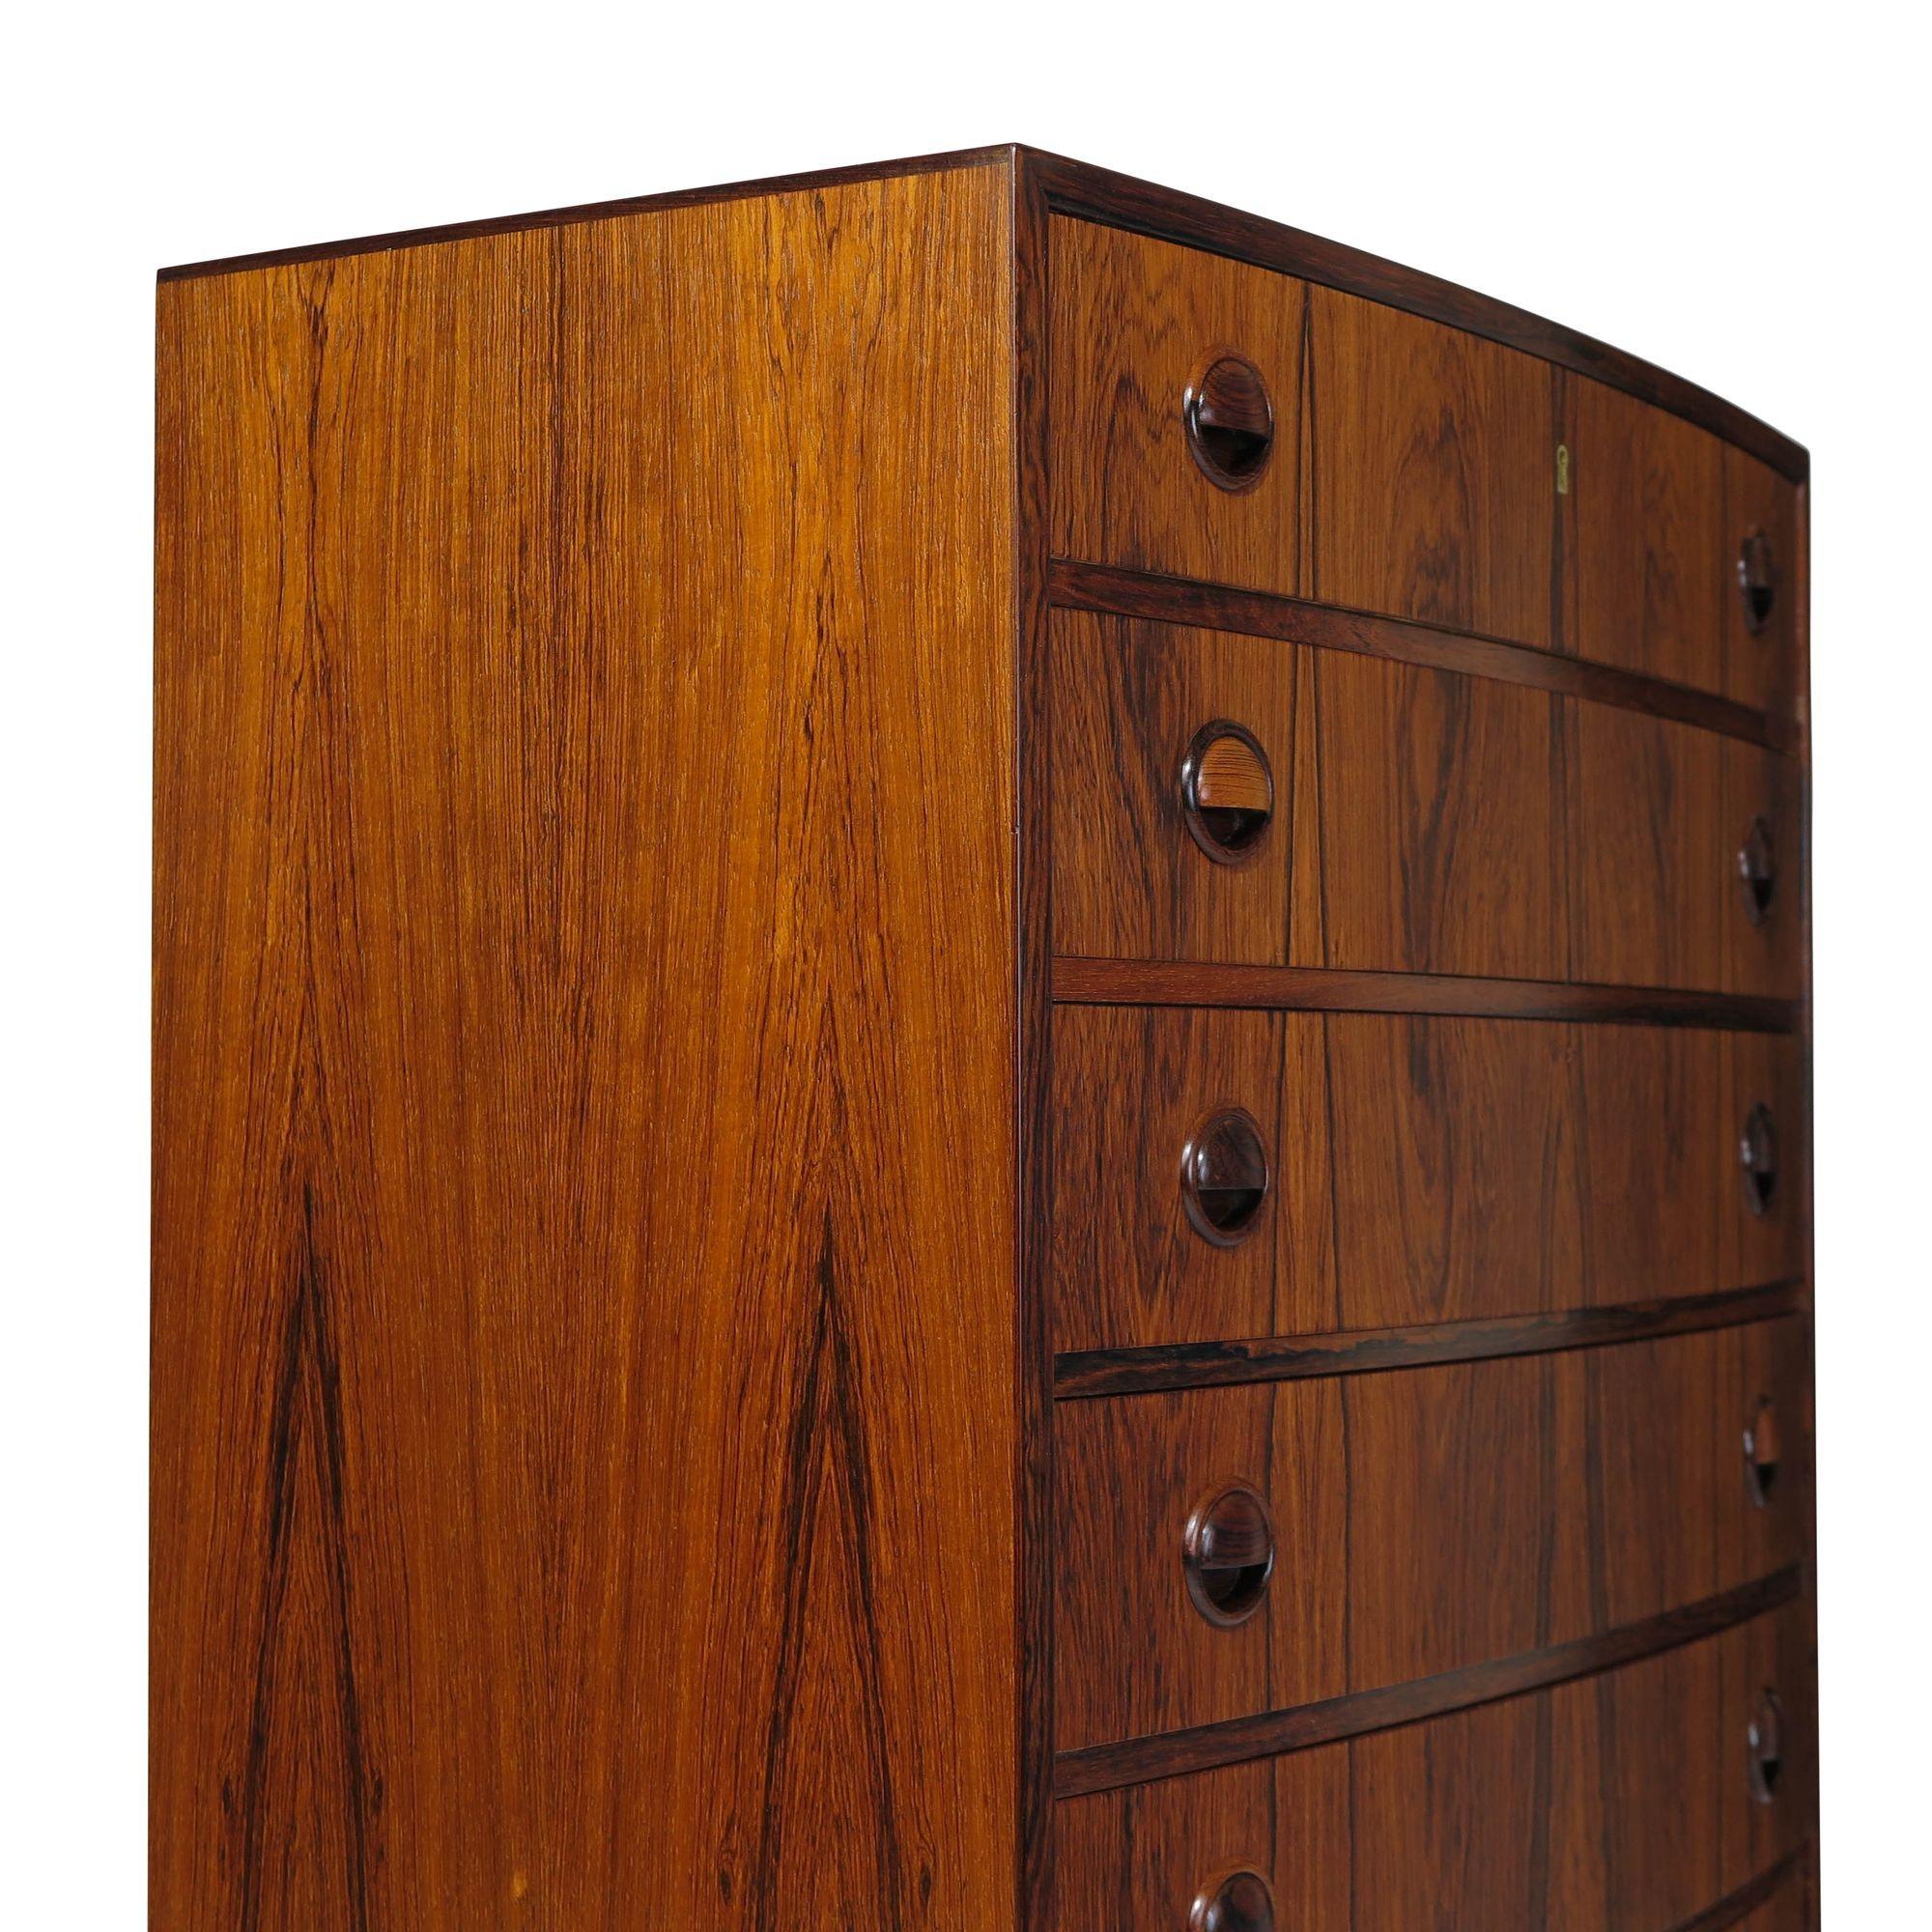 Kai Kristiansen Brazilian Rosewood Chest of Drawers In Excellent Condition For Sale In Oakland, CA